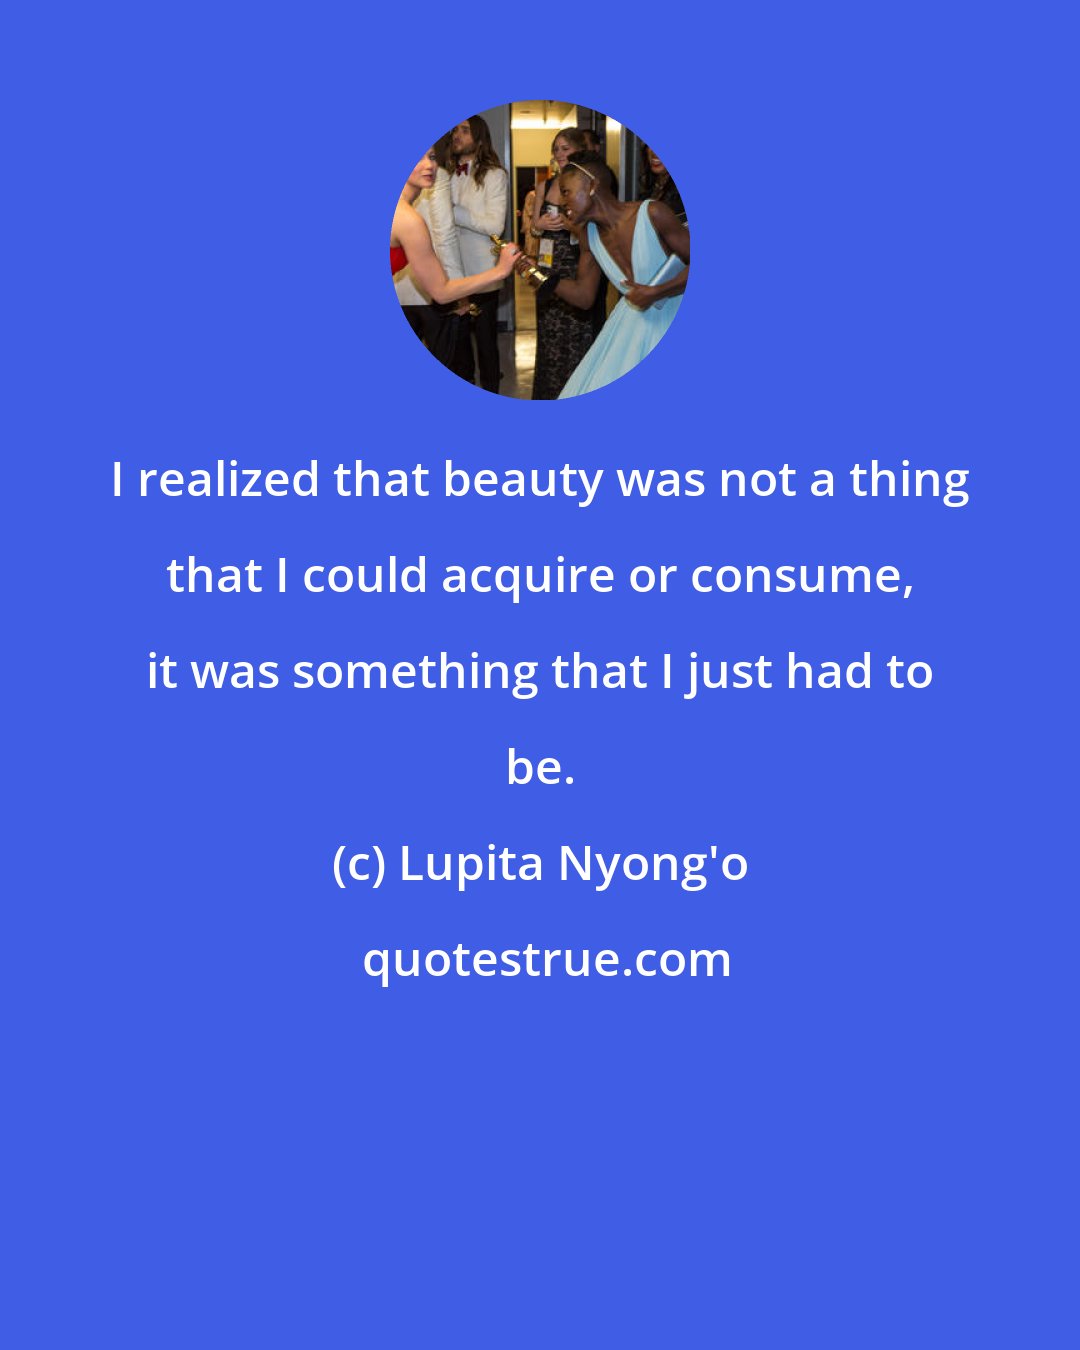 Lupita Nyong'o: I realized that beauty was not a thing that I could acquire or consume, it was something that I just had to be.